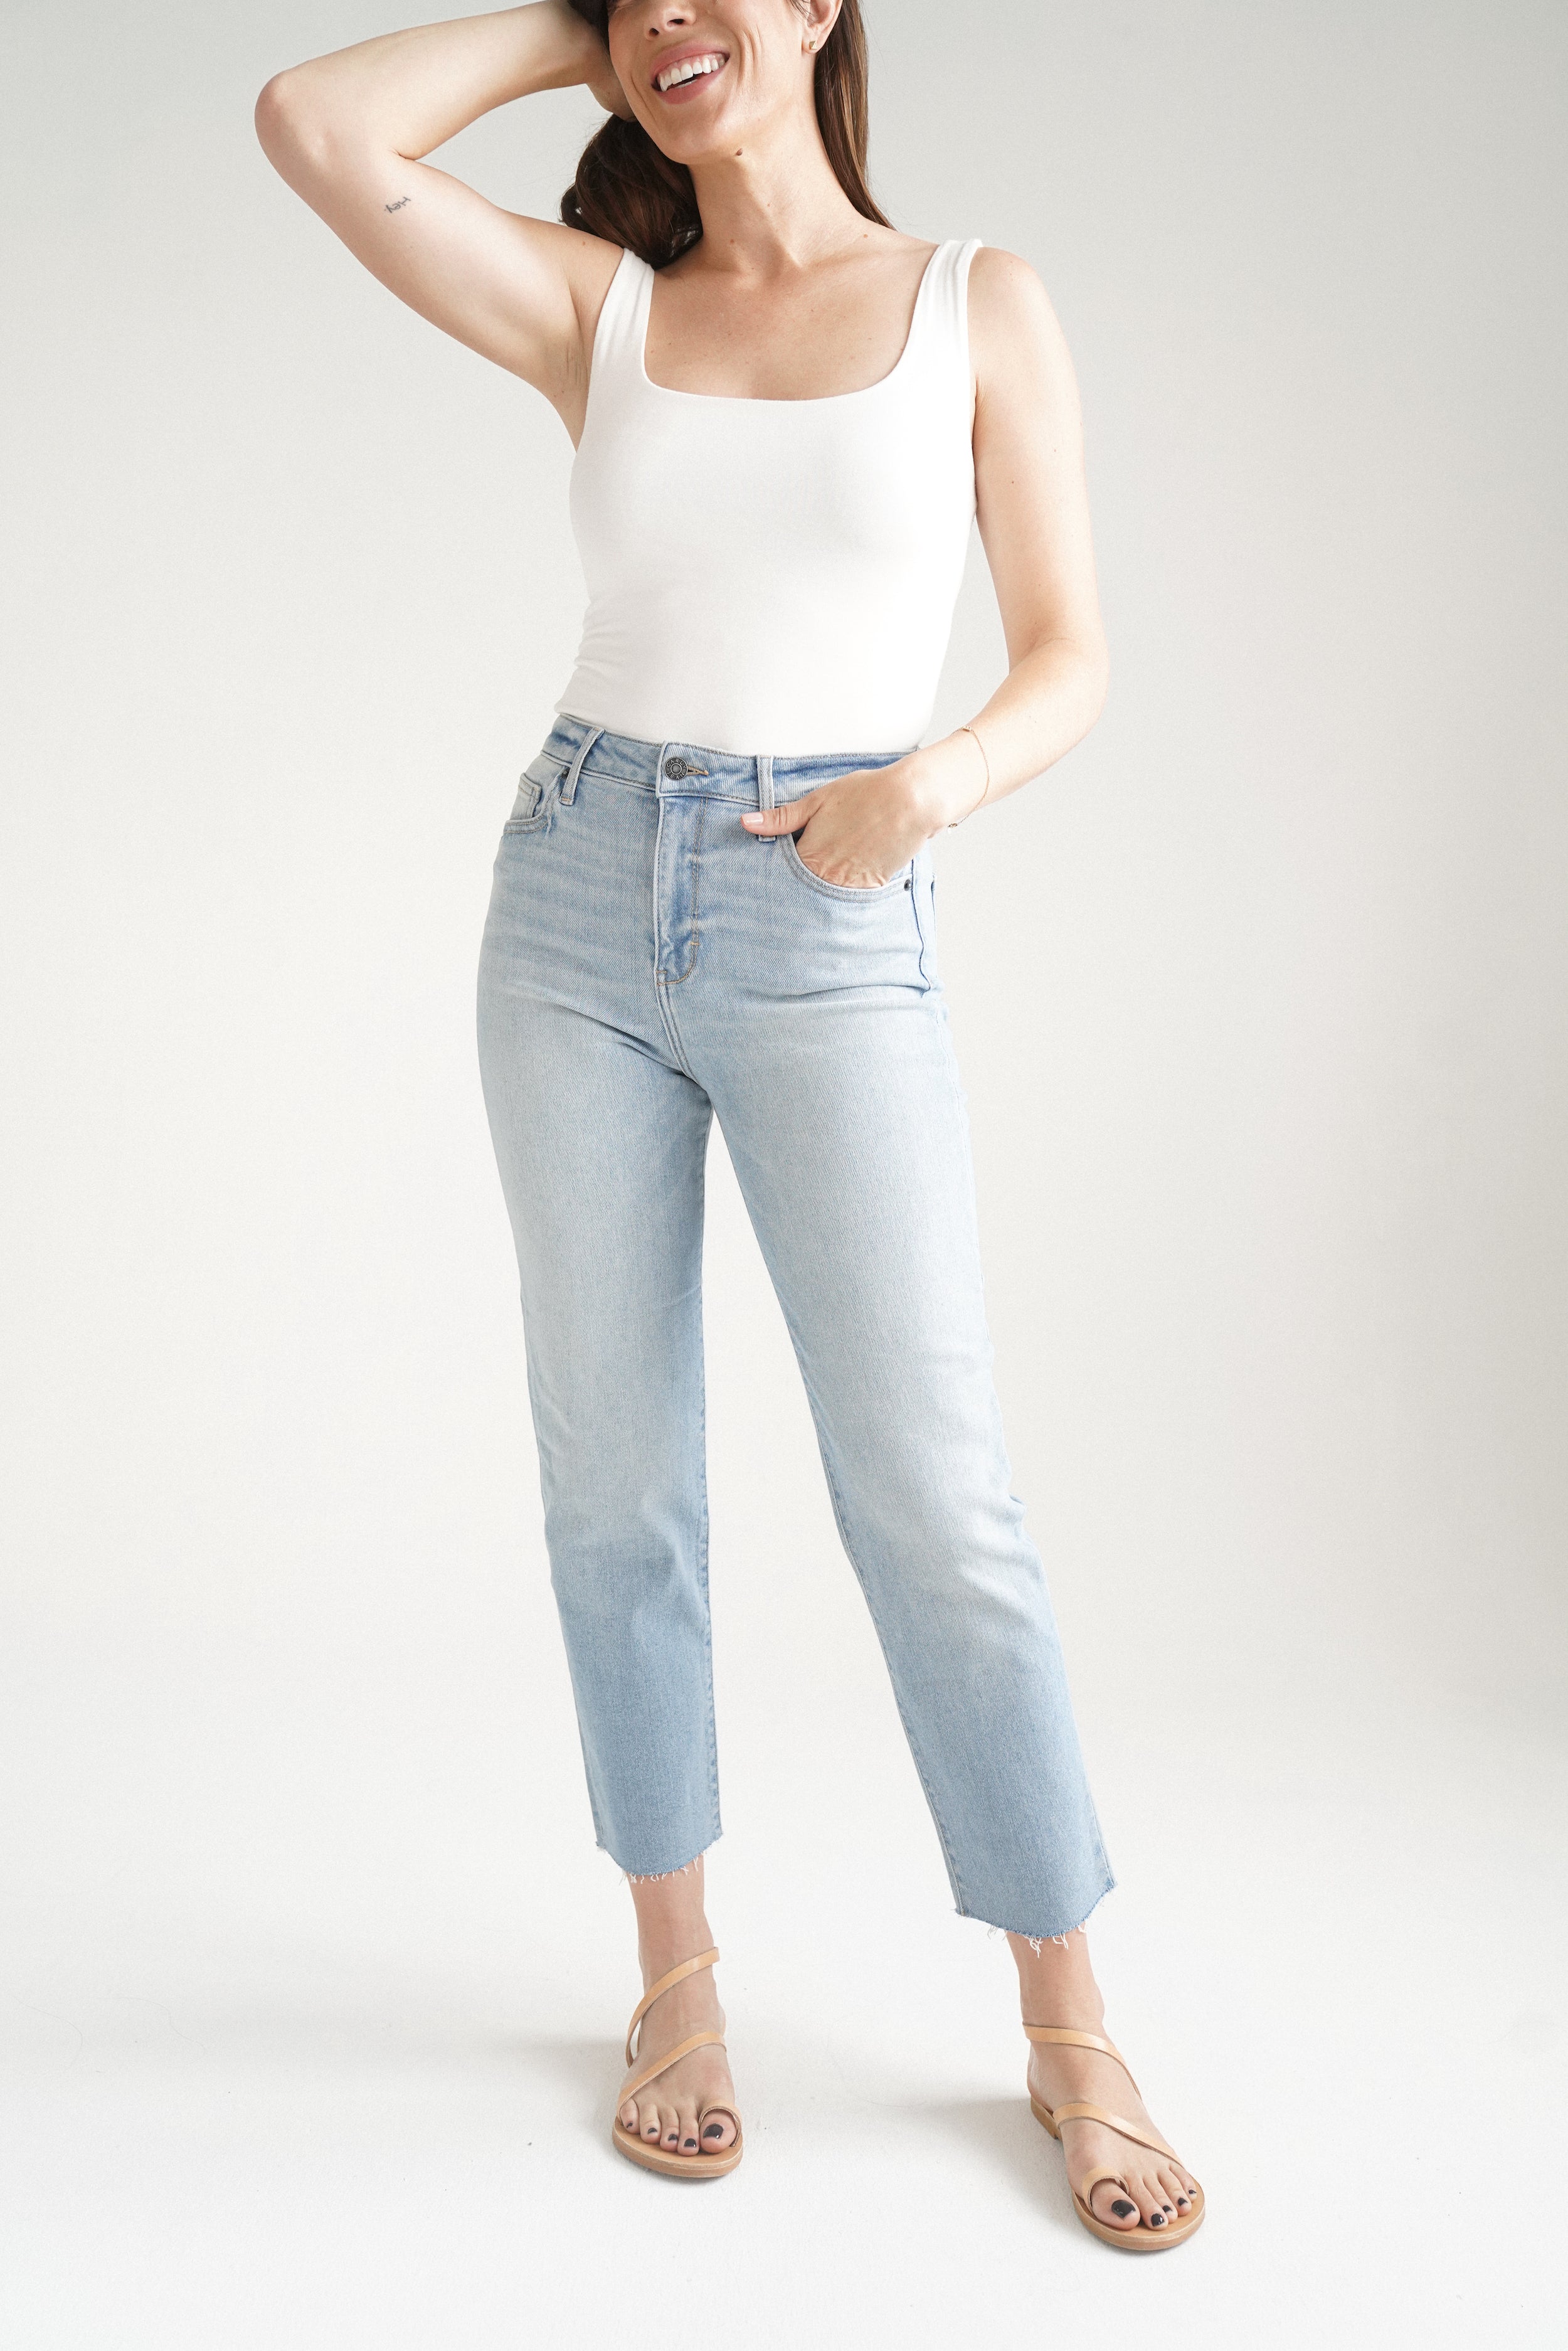 Chrissy Classic Straight Leg Jeans– CARLY JEAN LOS ANGELES